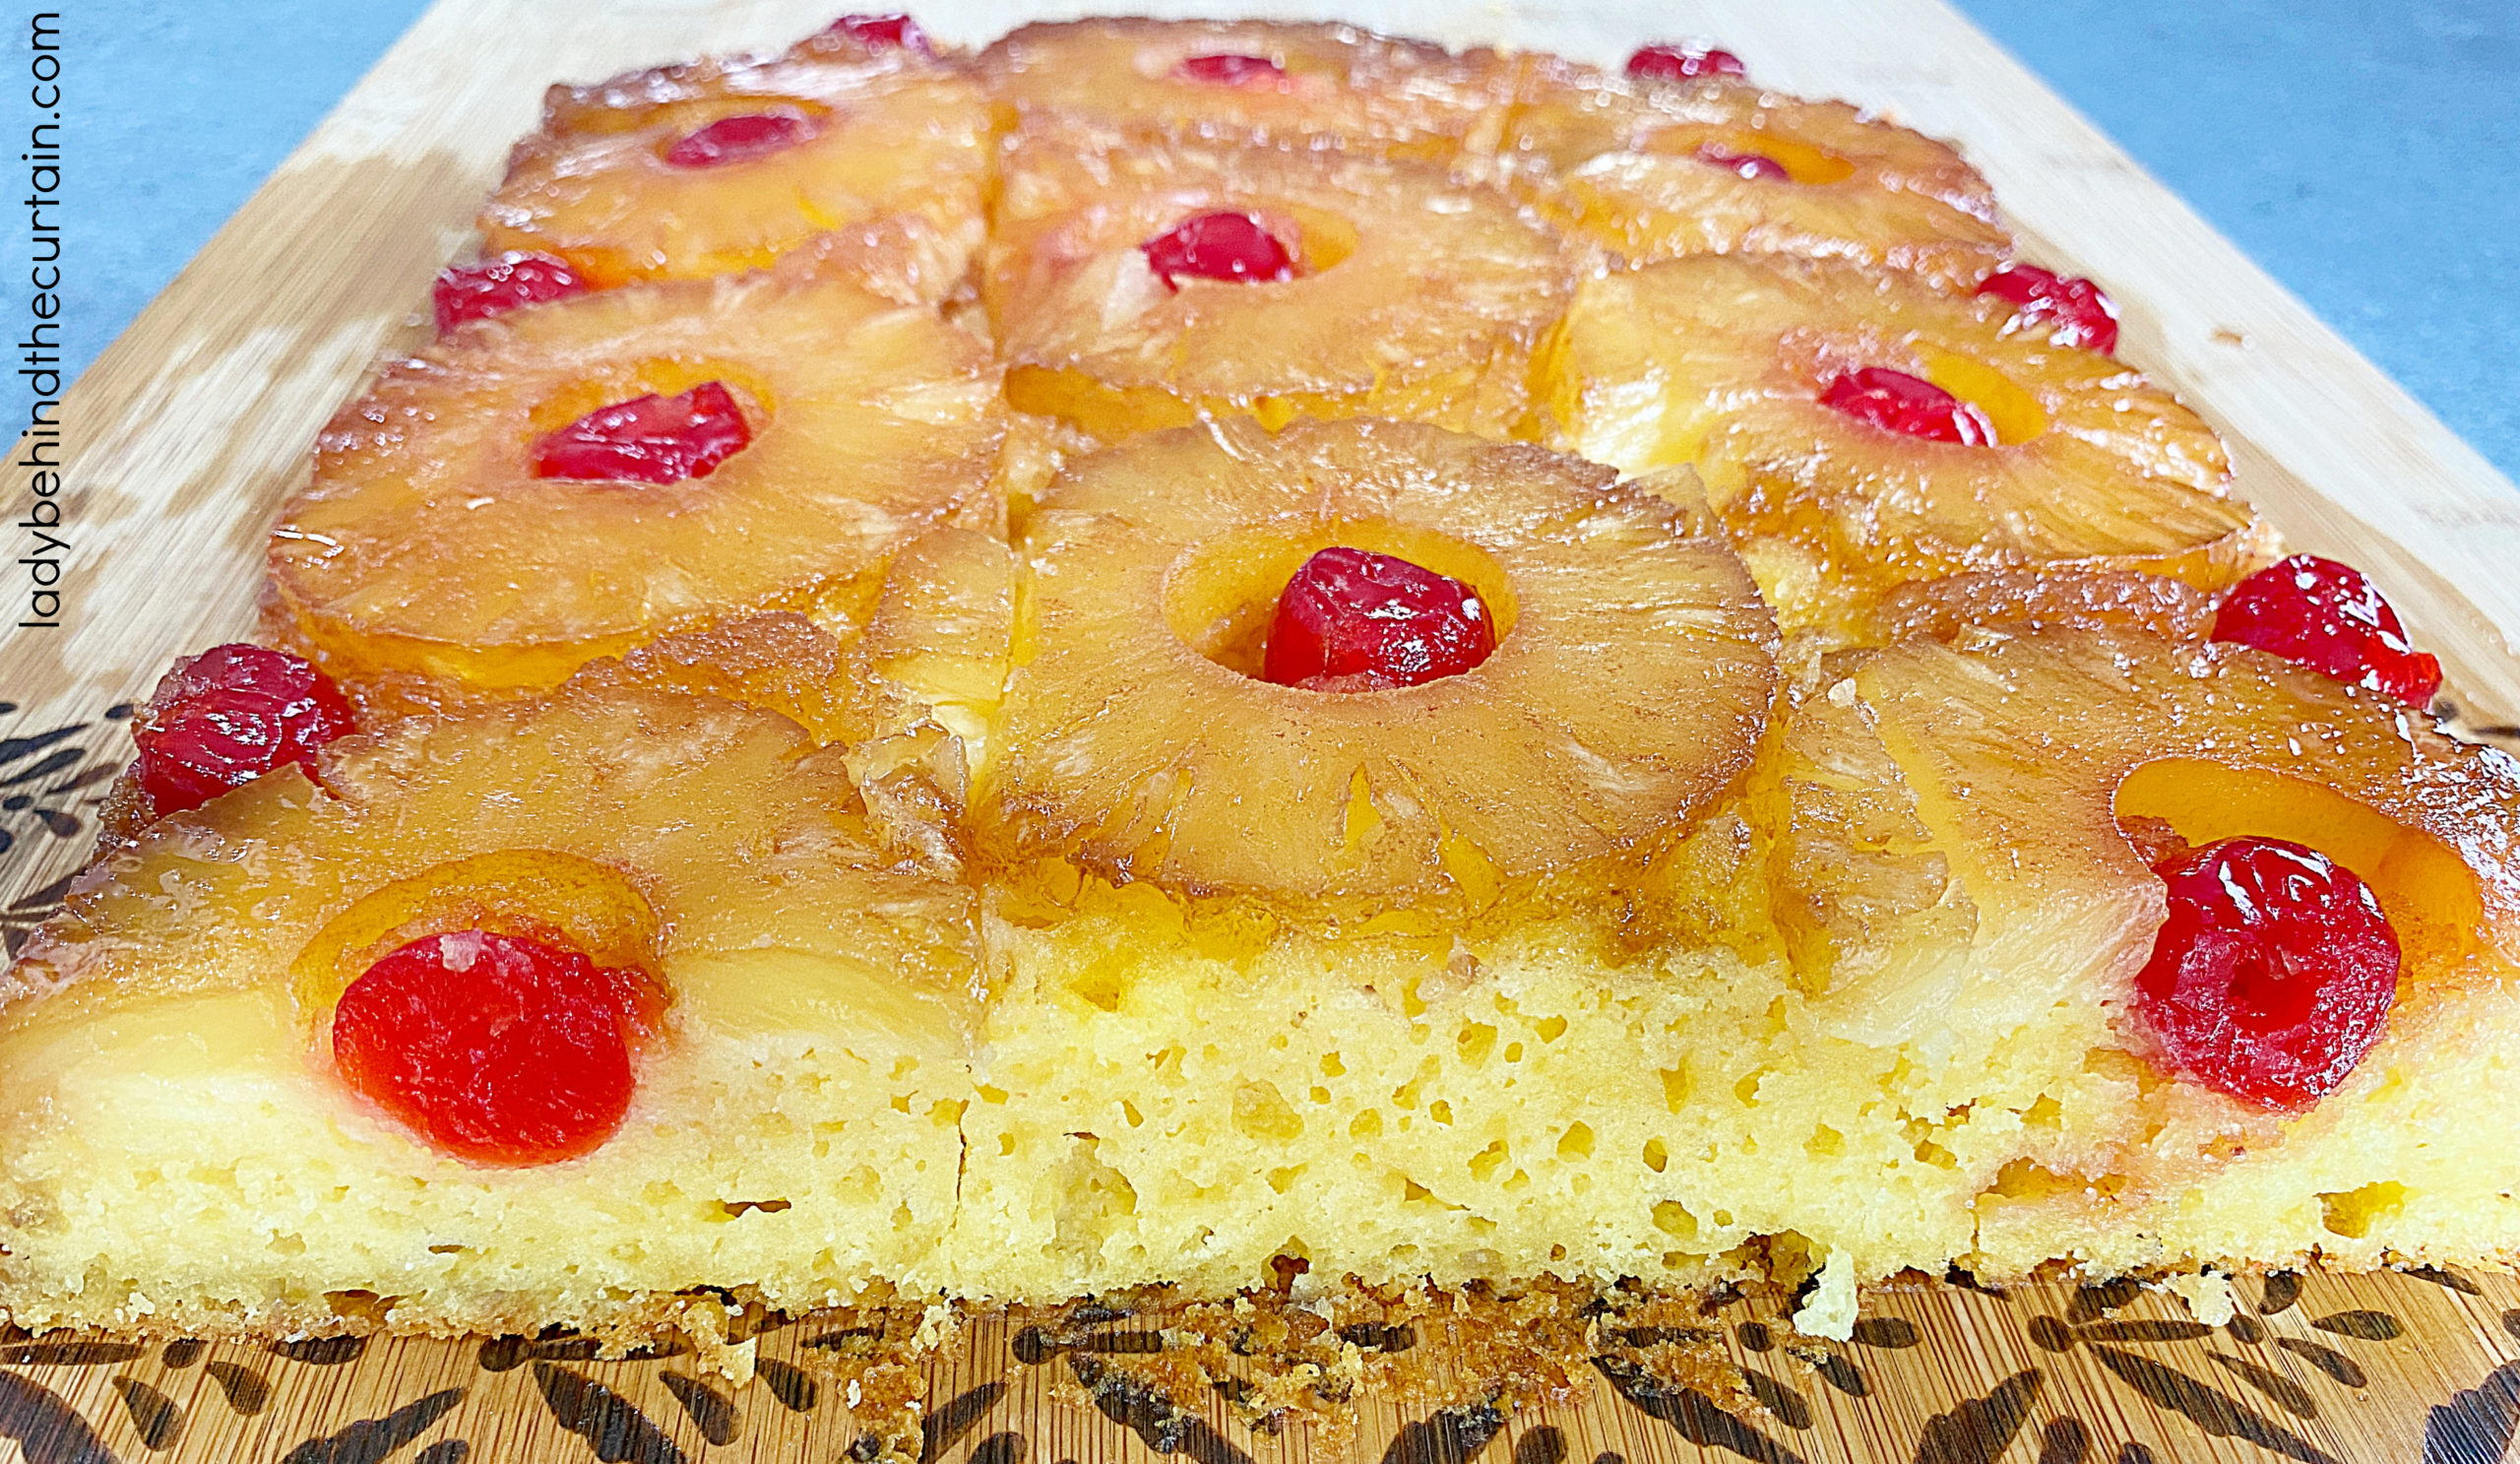 https://www.ladybehindthecurtain.com/wp-content/uploads/2021/08/Classic-Pineapple-Upside-Down-Cake-2-1-scaled.jpg